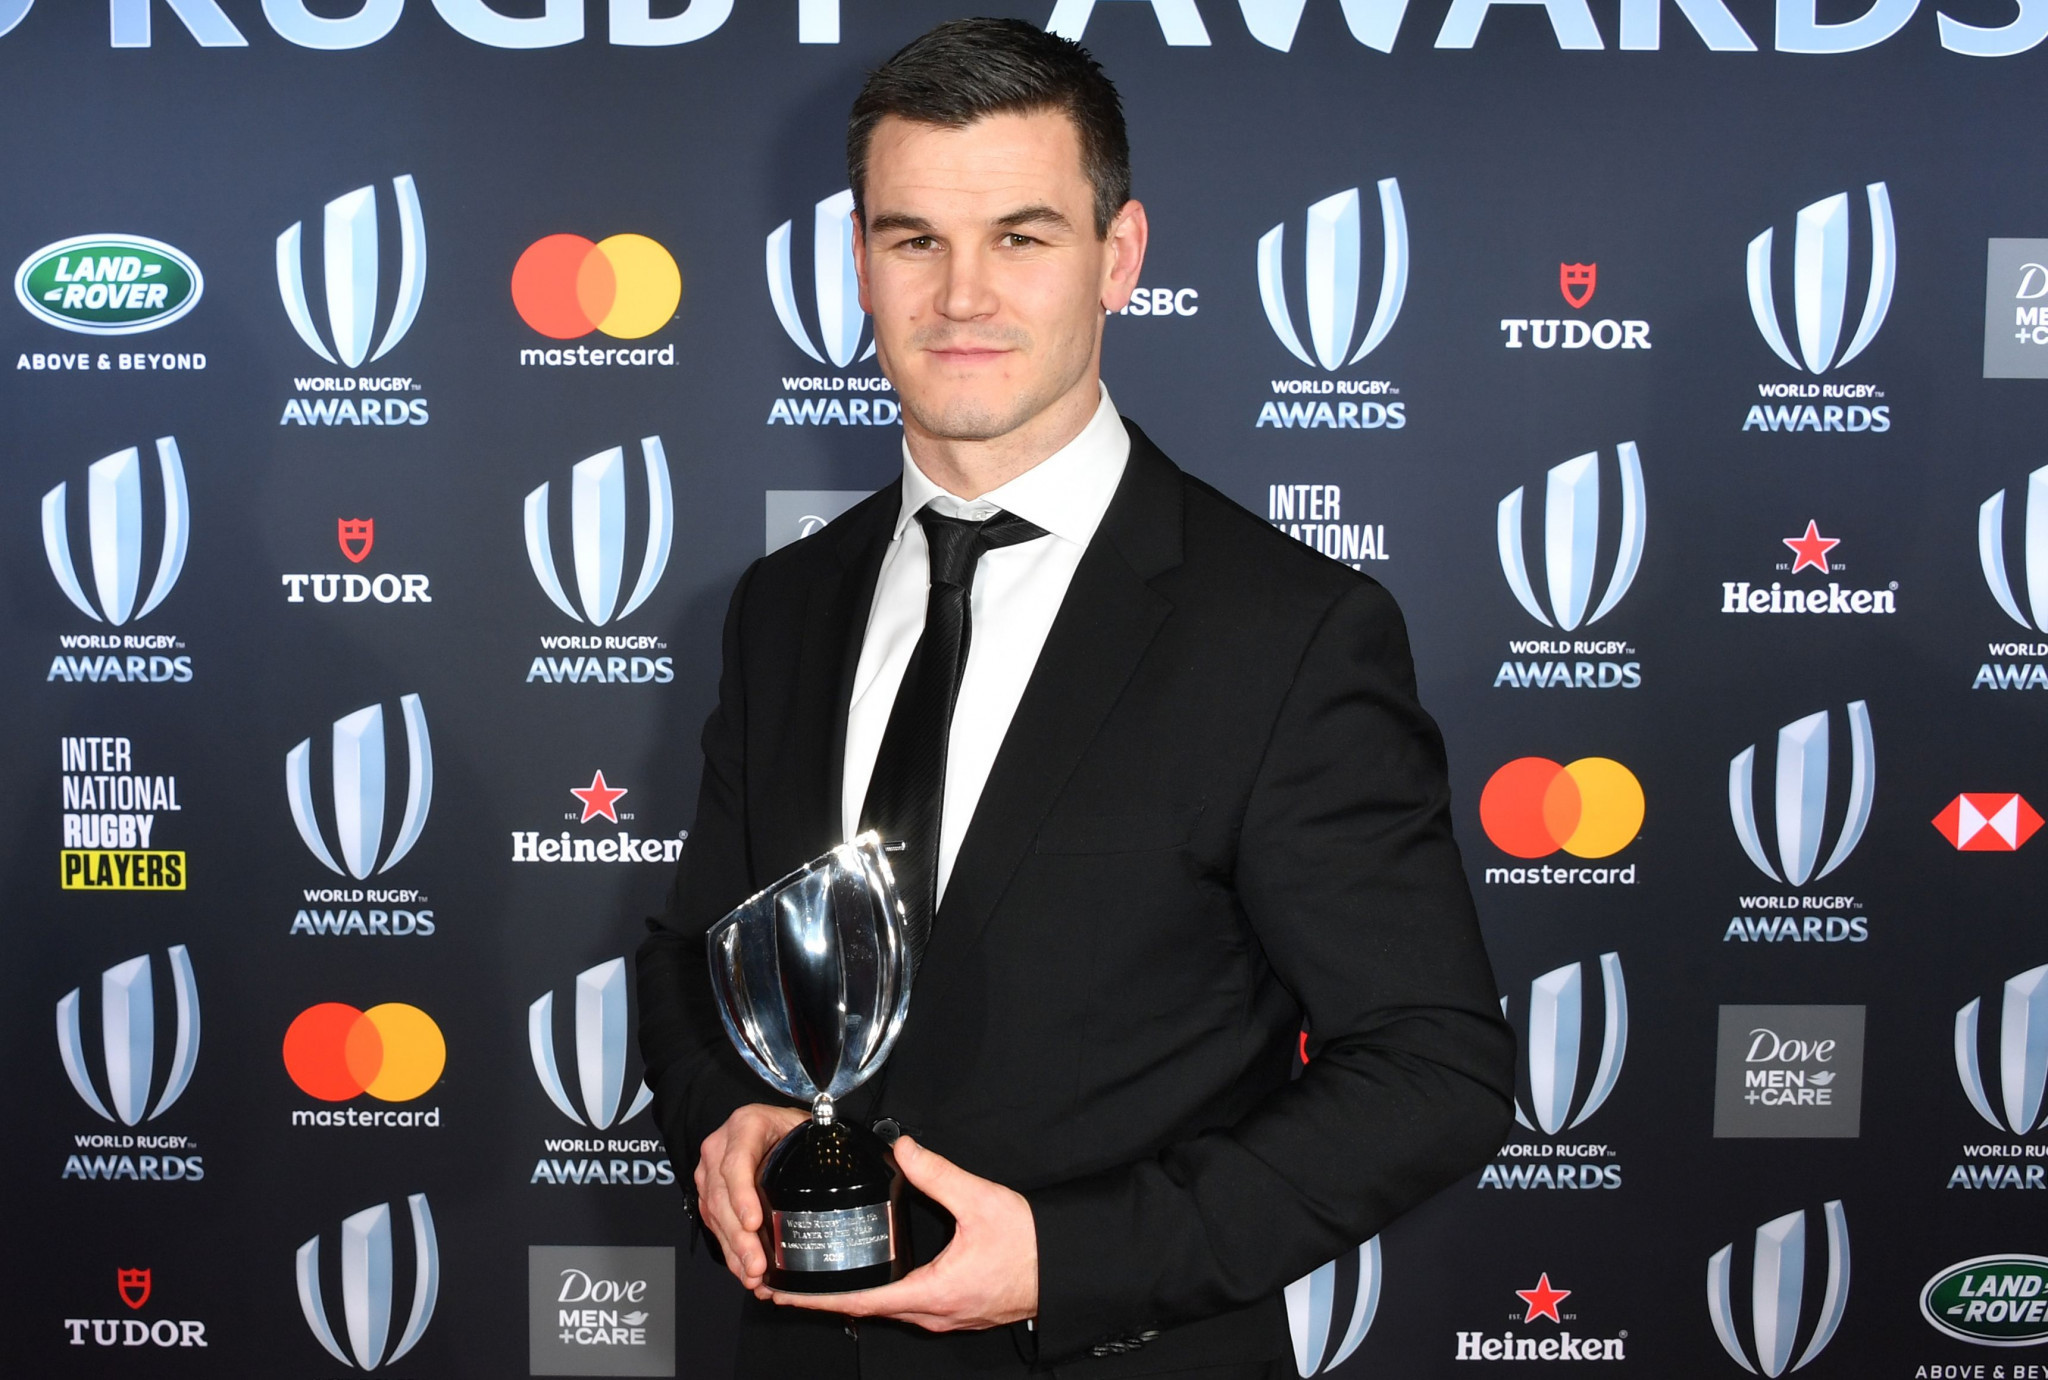 Ireland celebrate successful year with three wins at World Rugby Awards in Monte Carlo